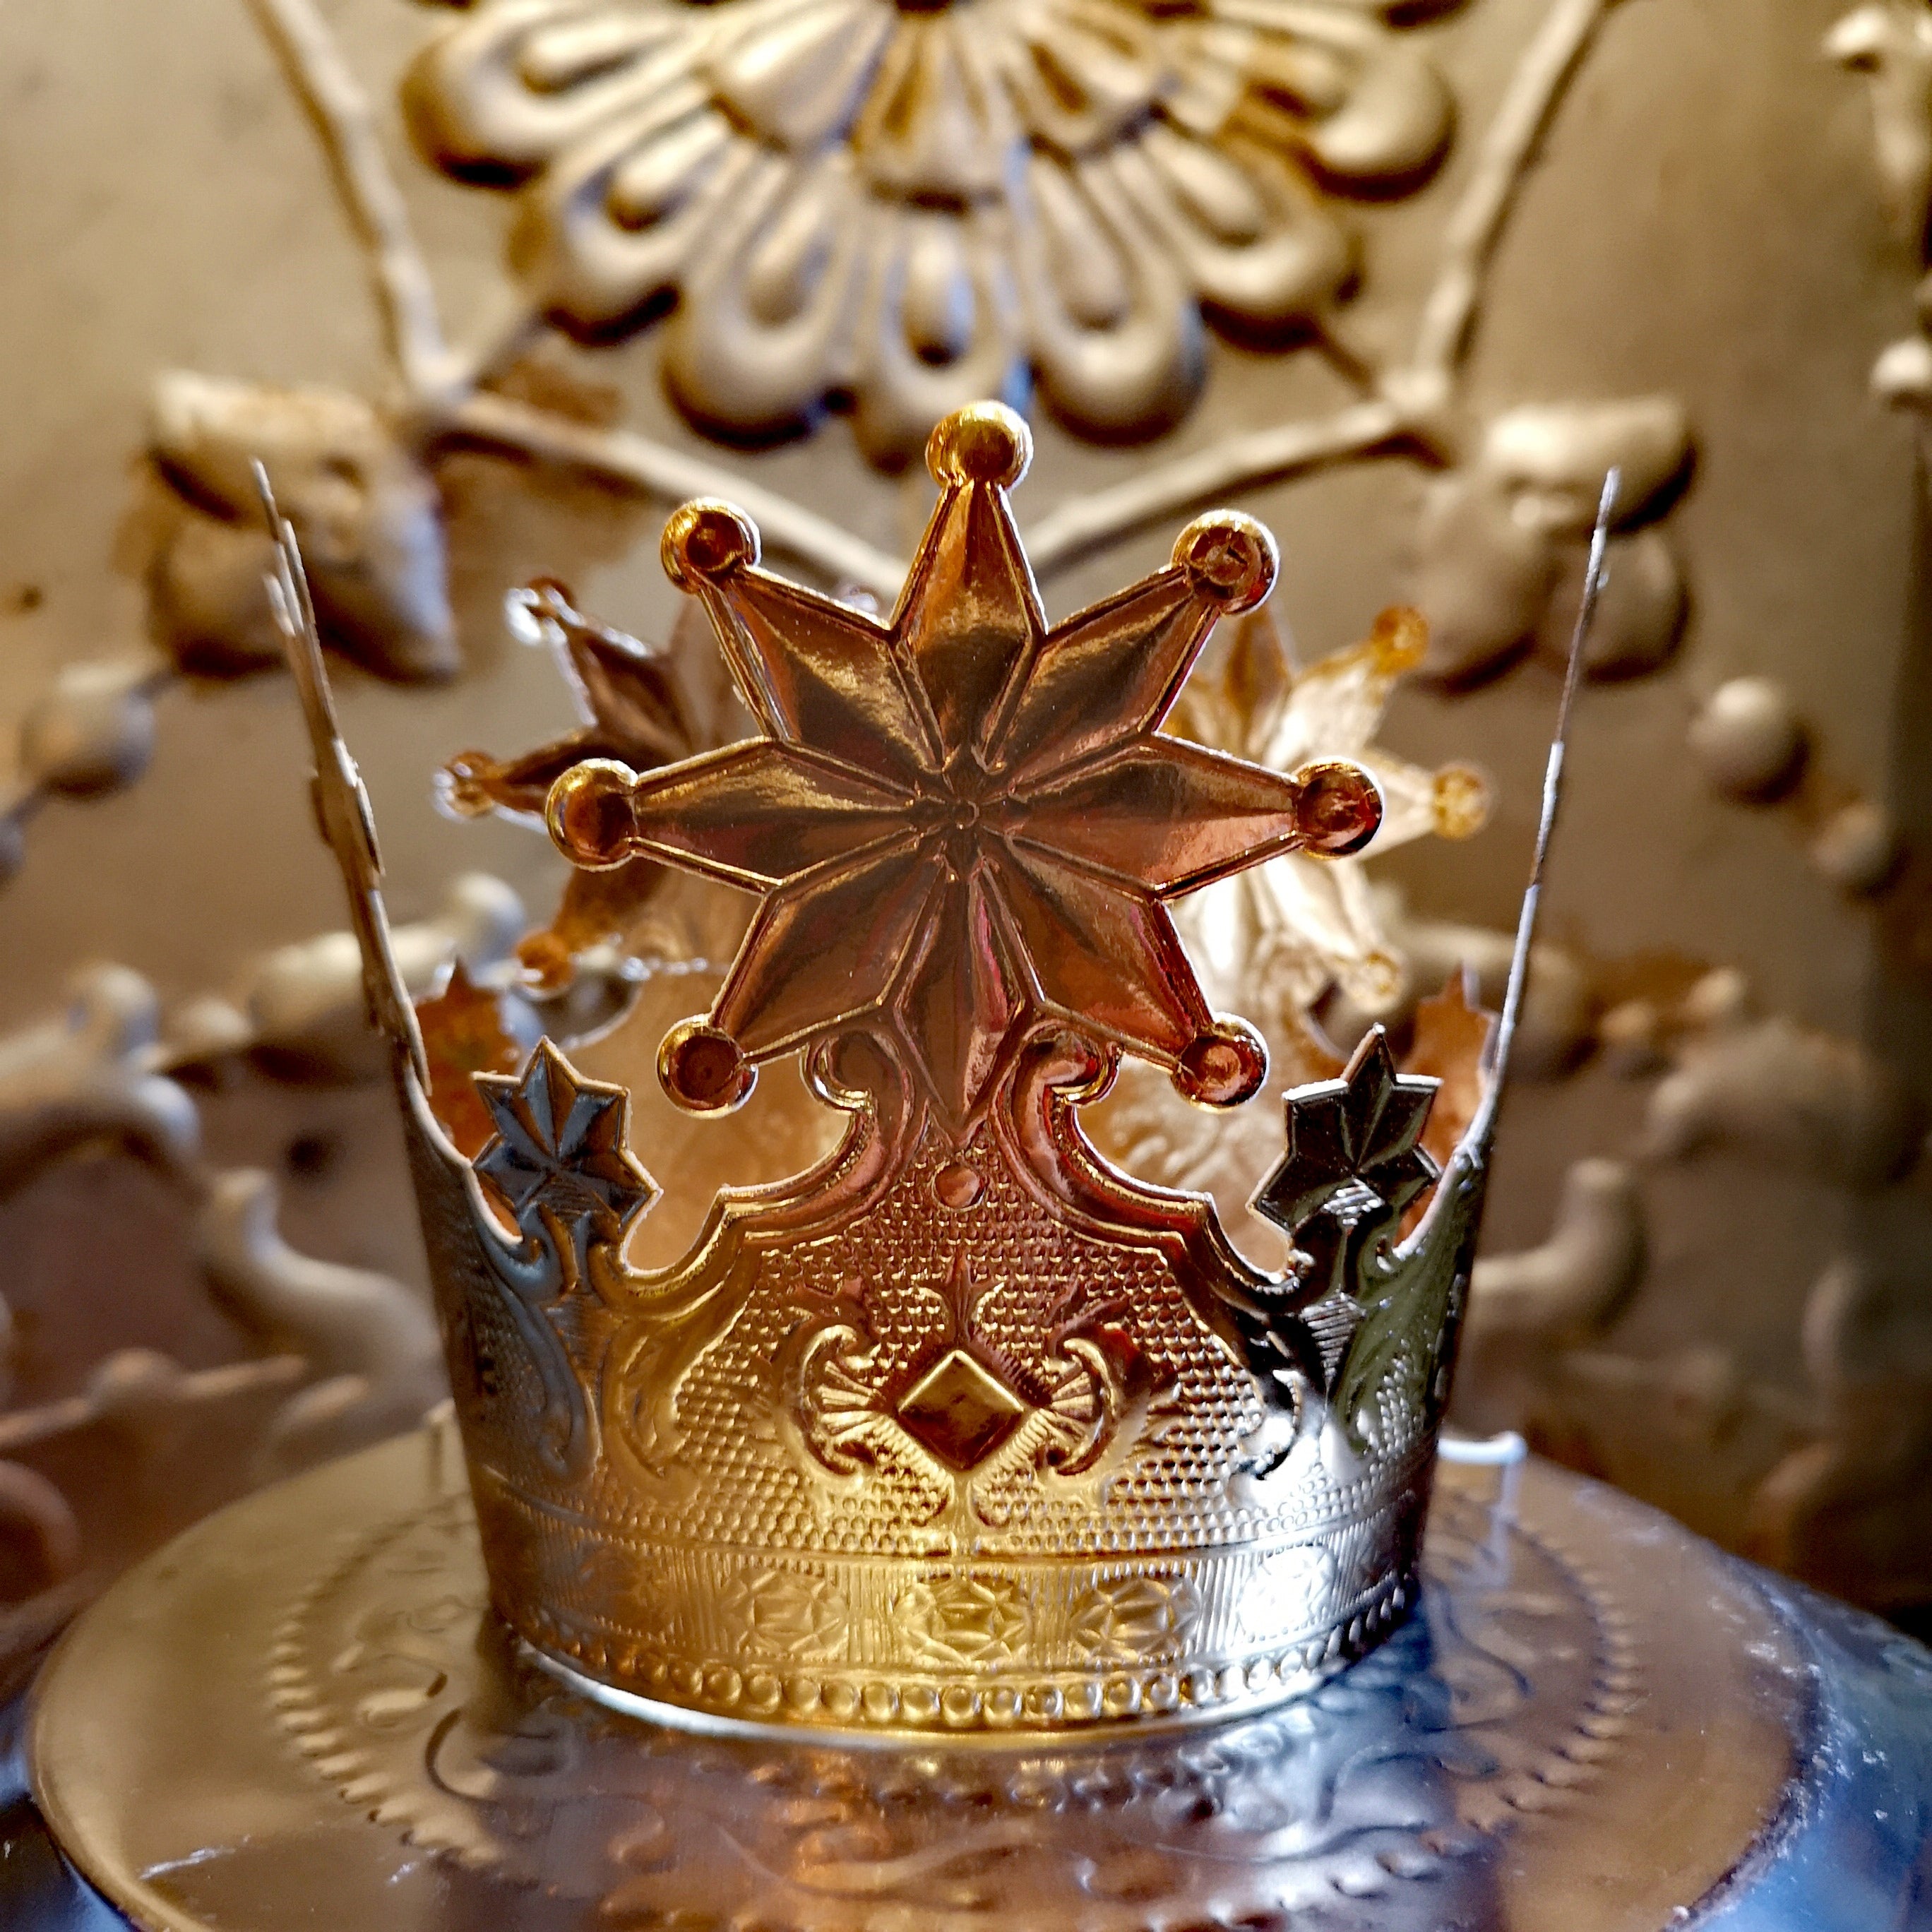 Regal crowns from embossed card